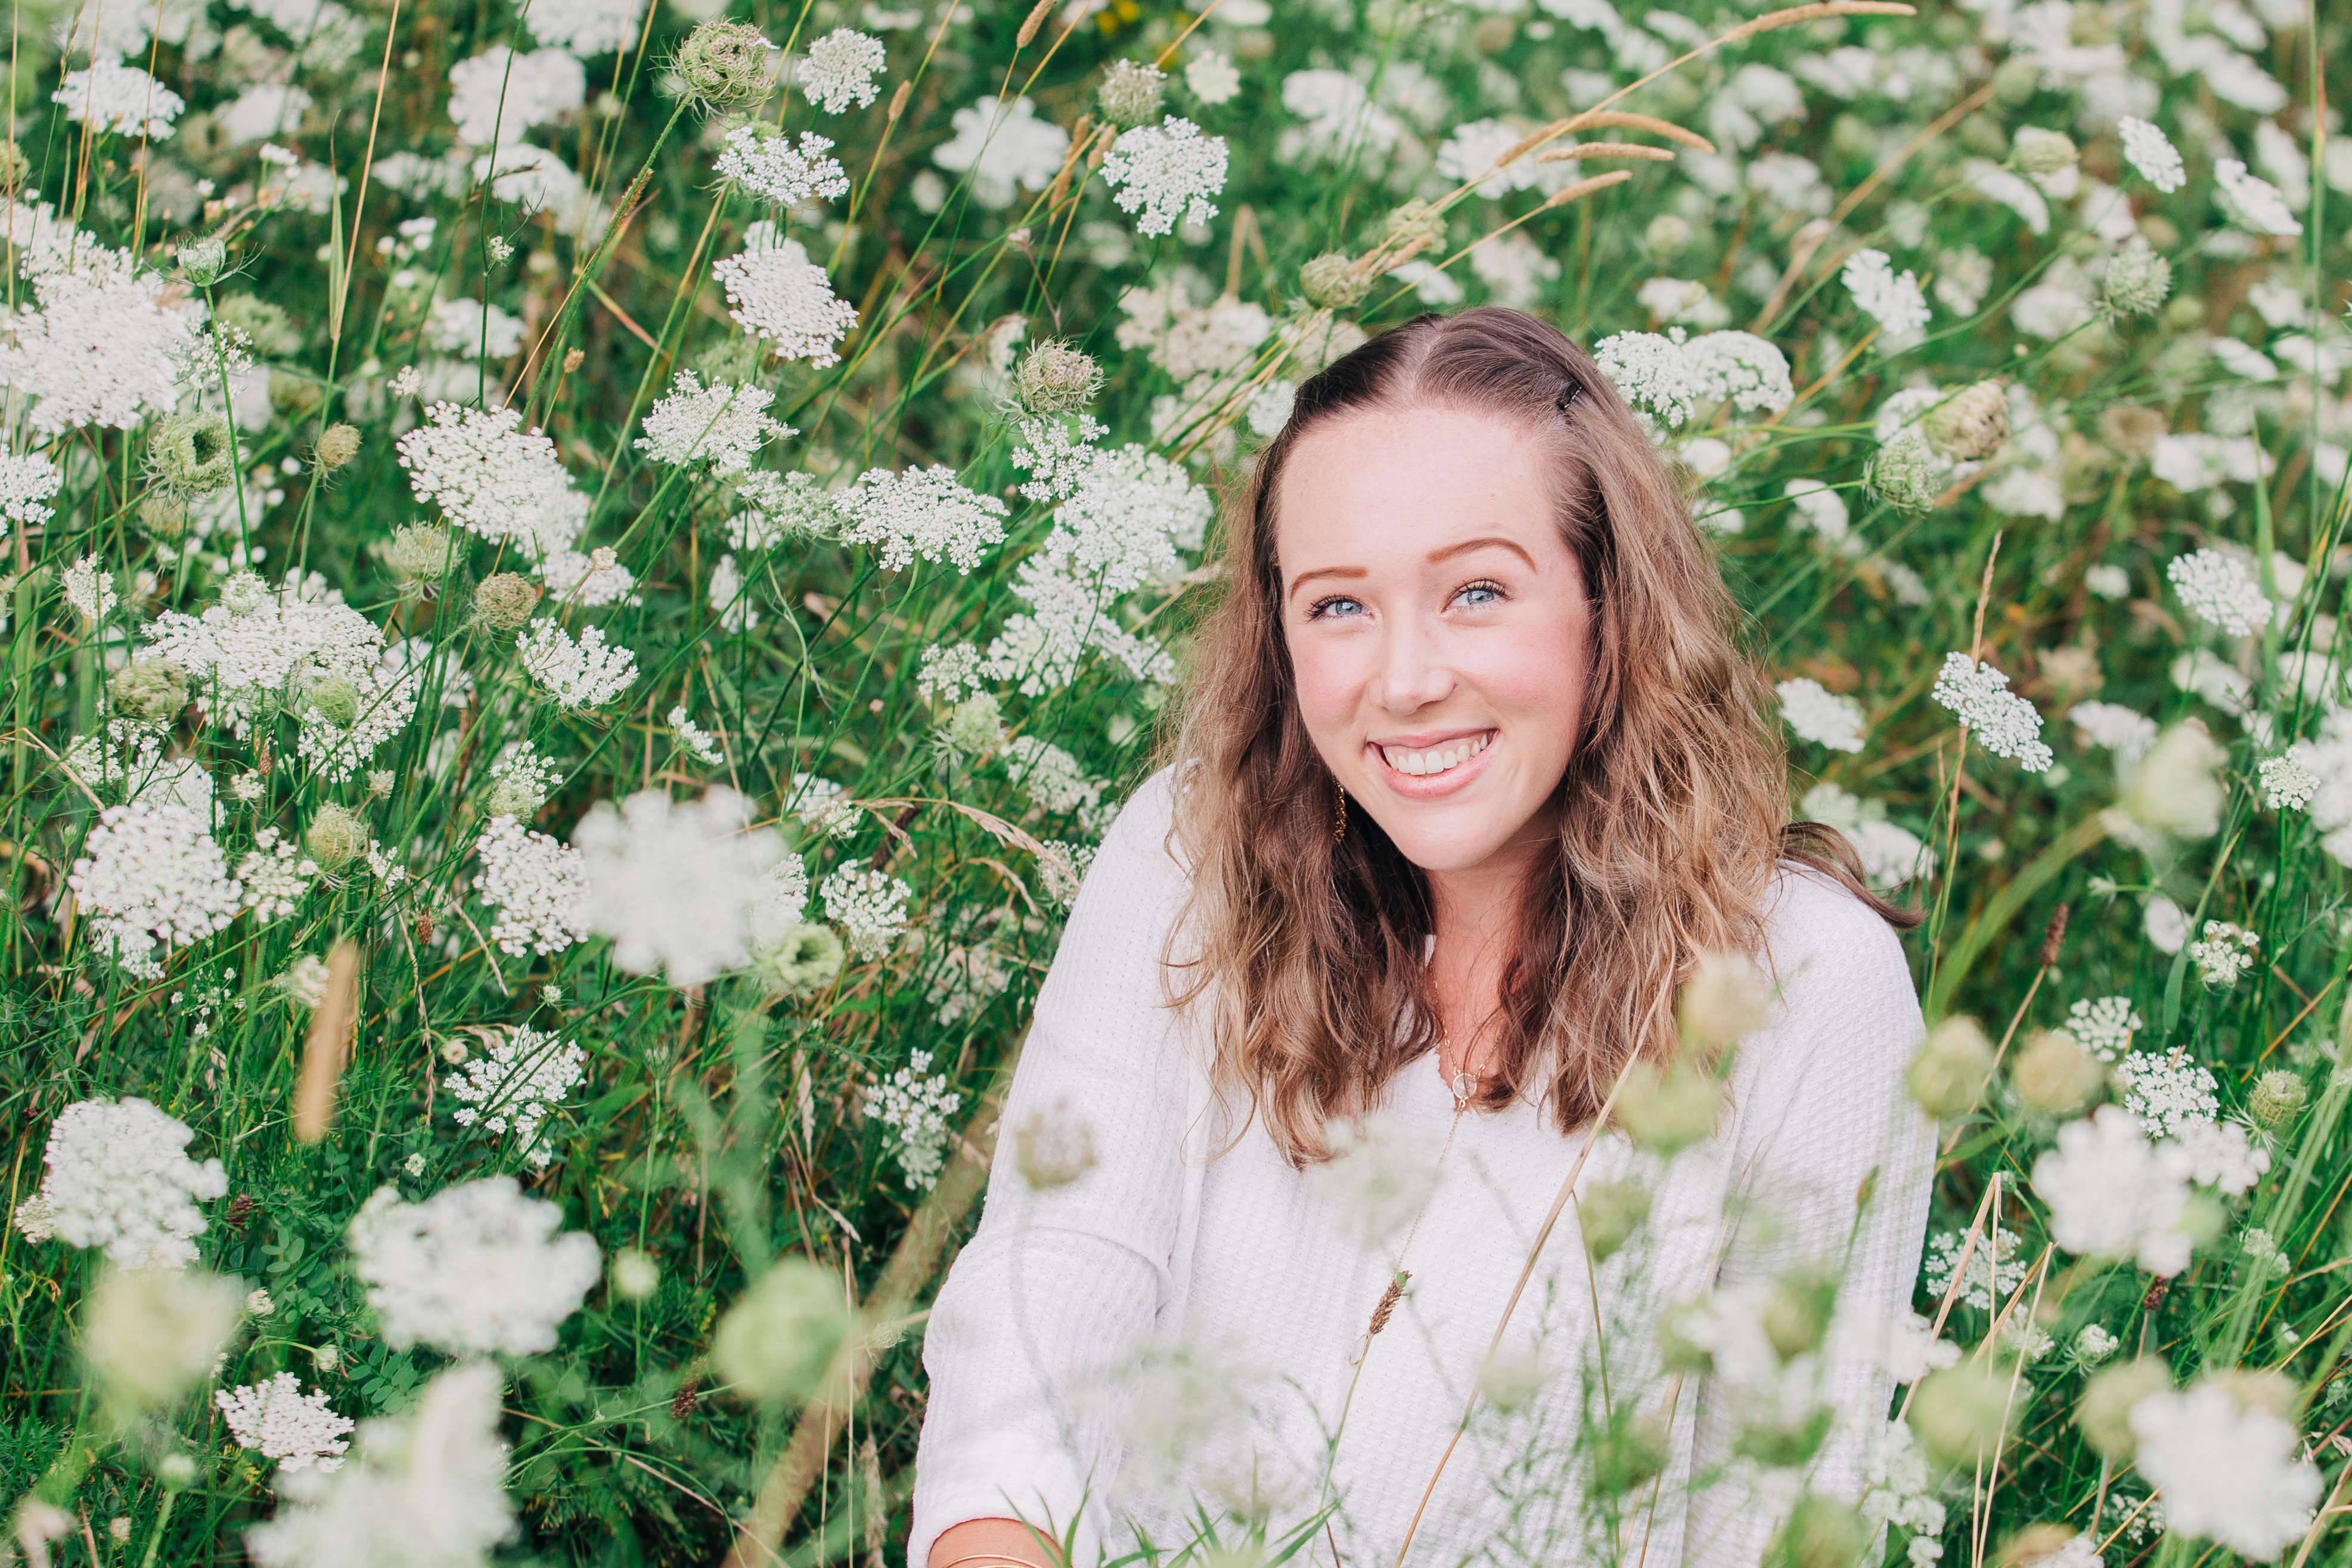 Jessica has long, brown hair and a white blouse. She sits in a field of flowers.